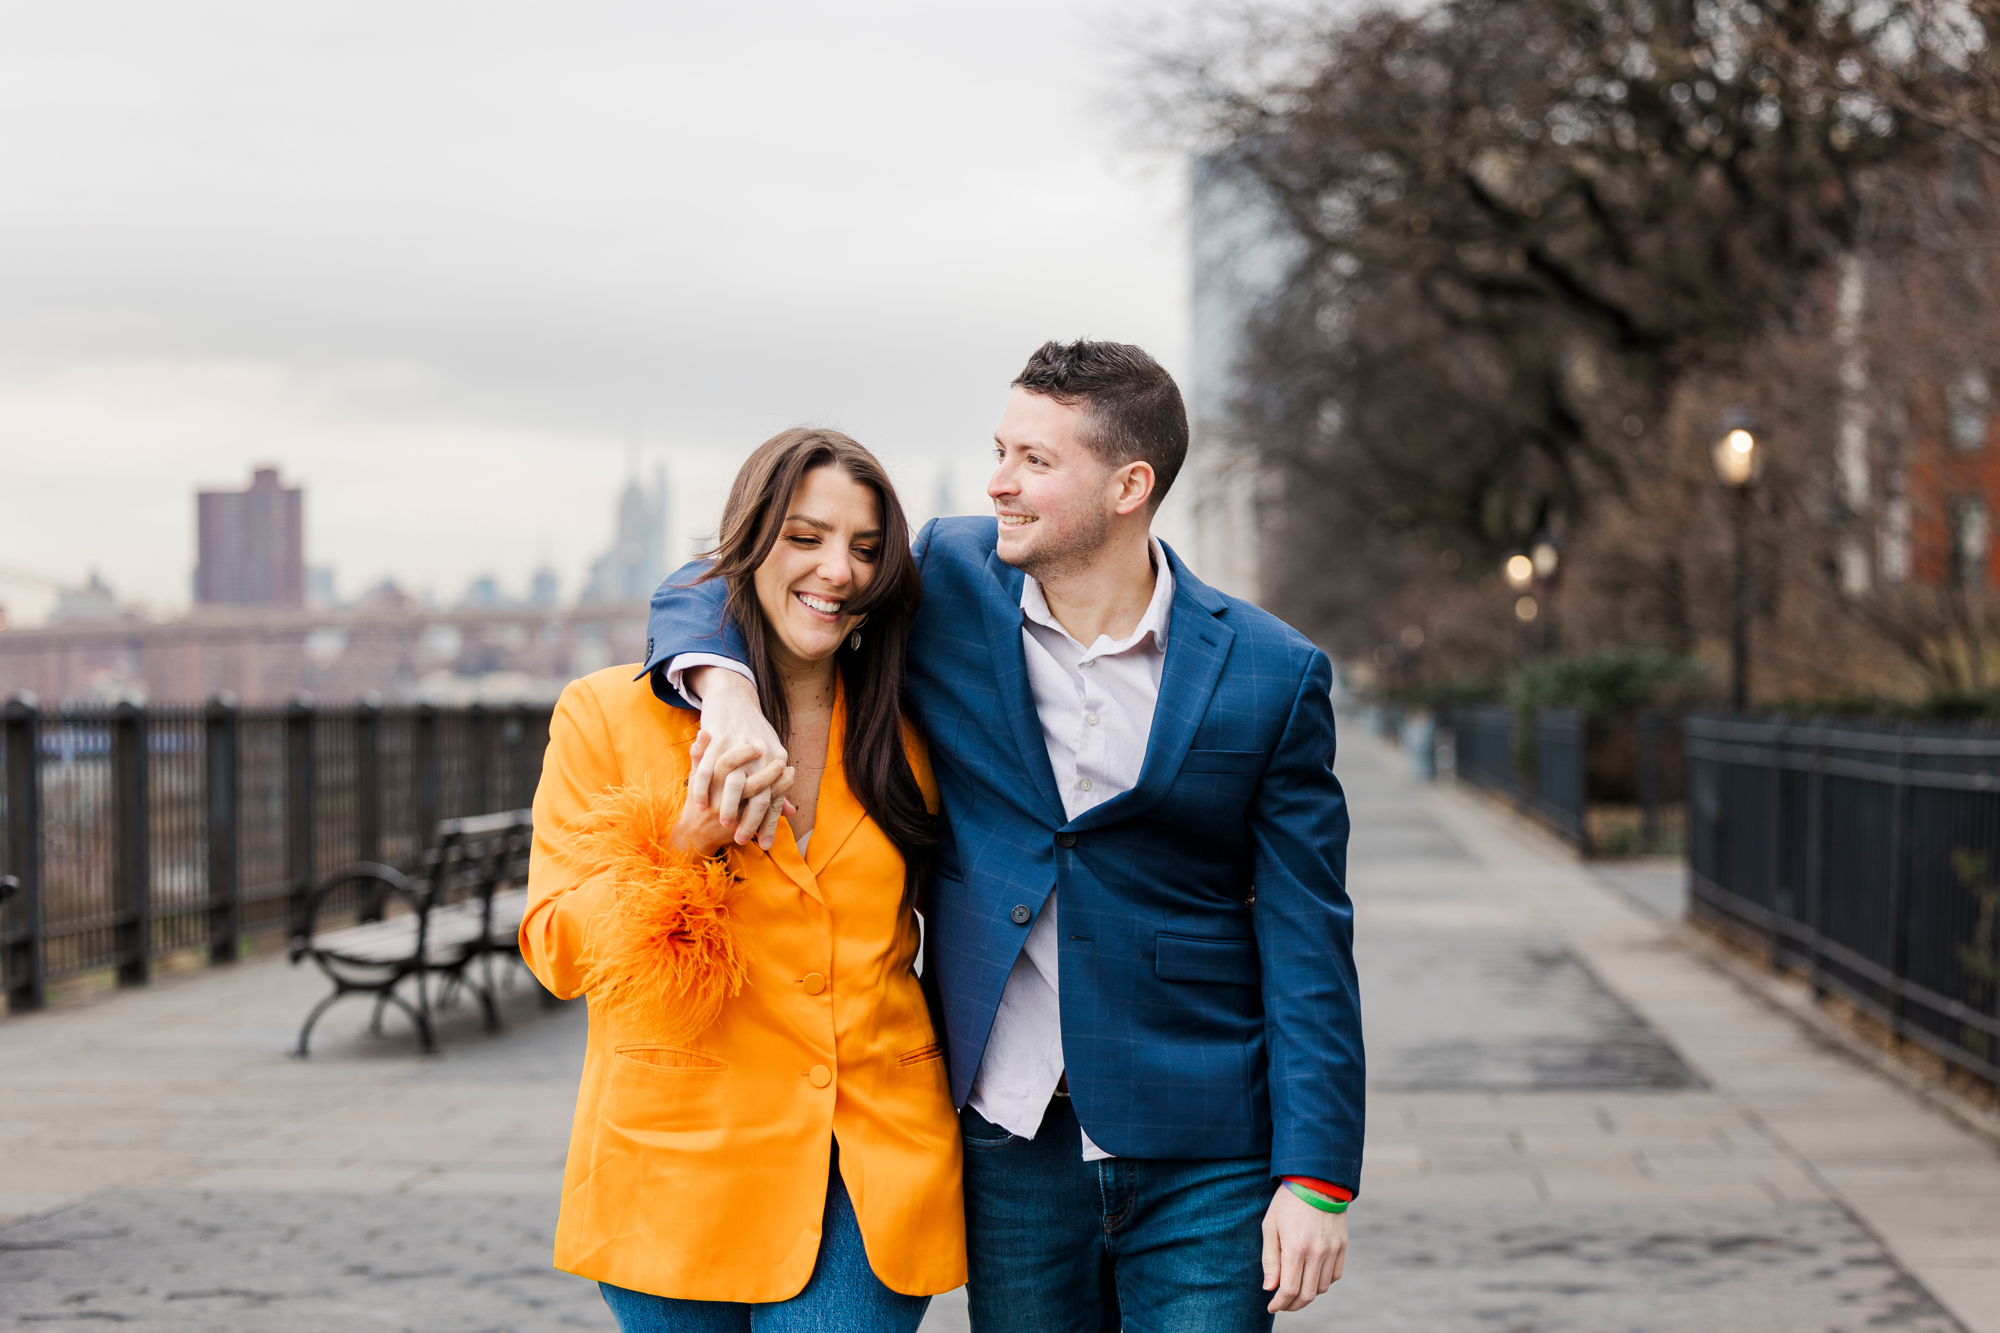 Playful Brooklyn Heights Engagement Photos